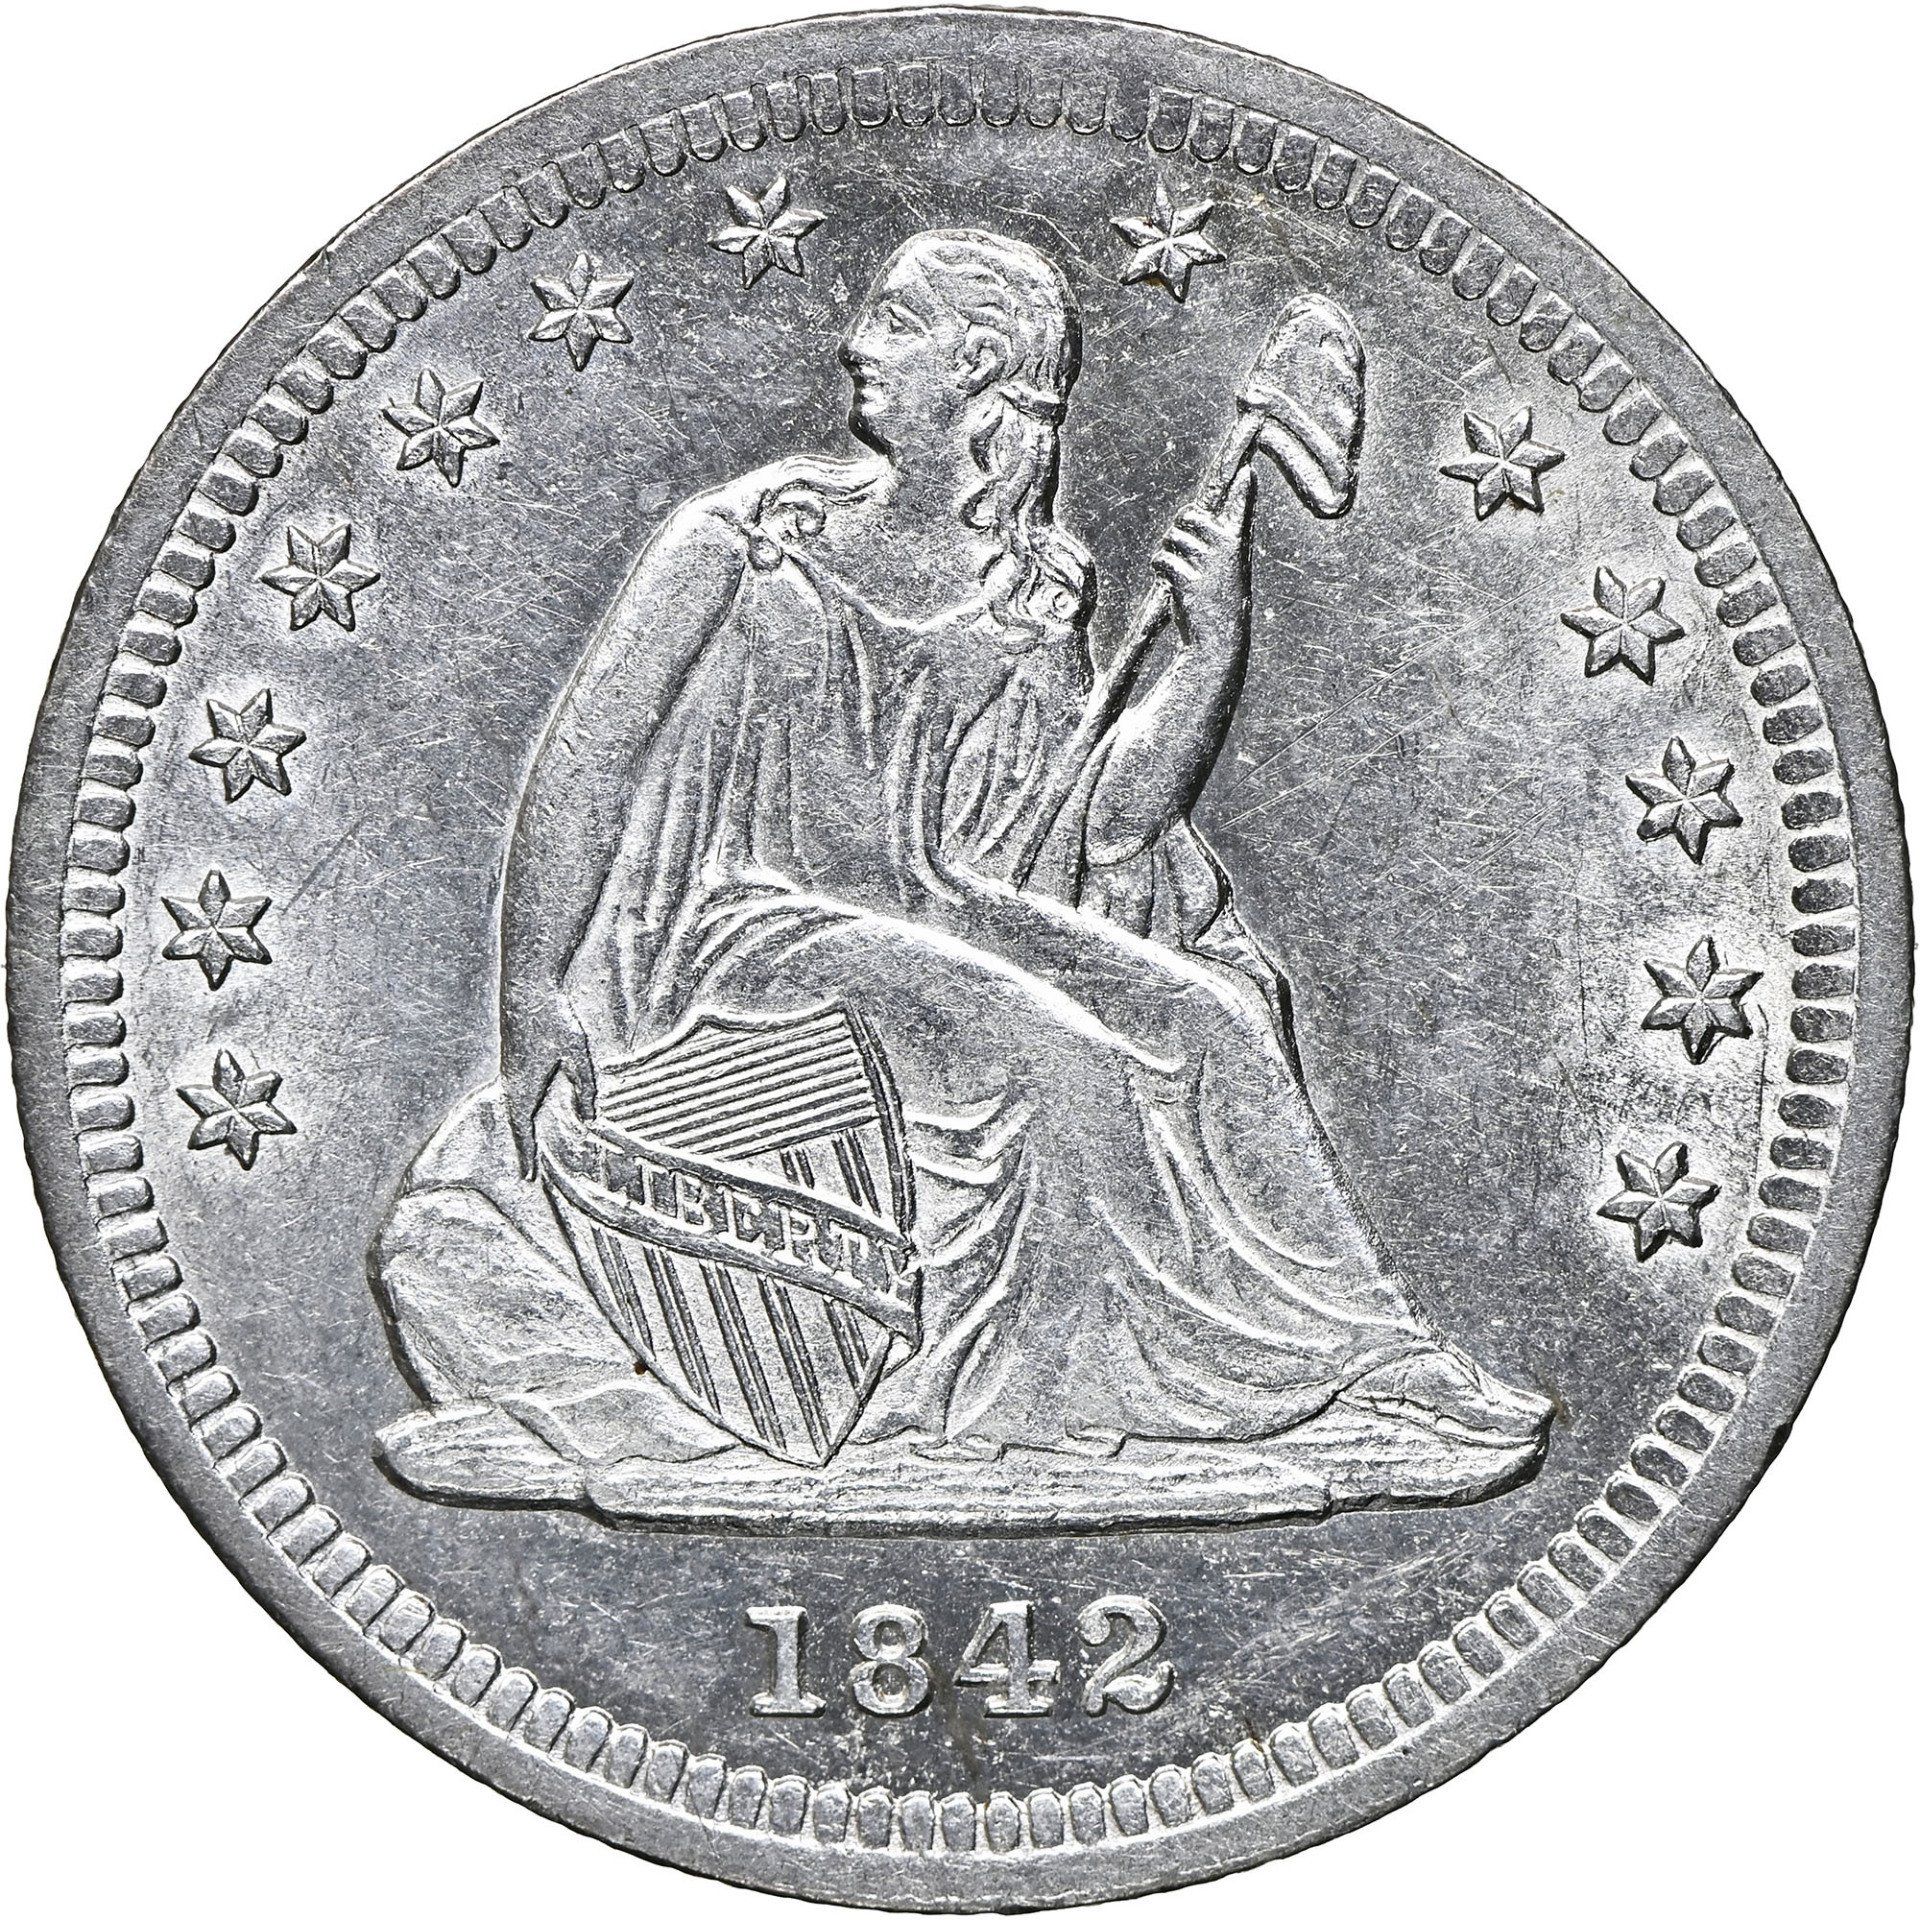 1842 O small date seated liberty quarter image courtesy of NGC